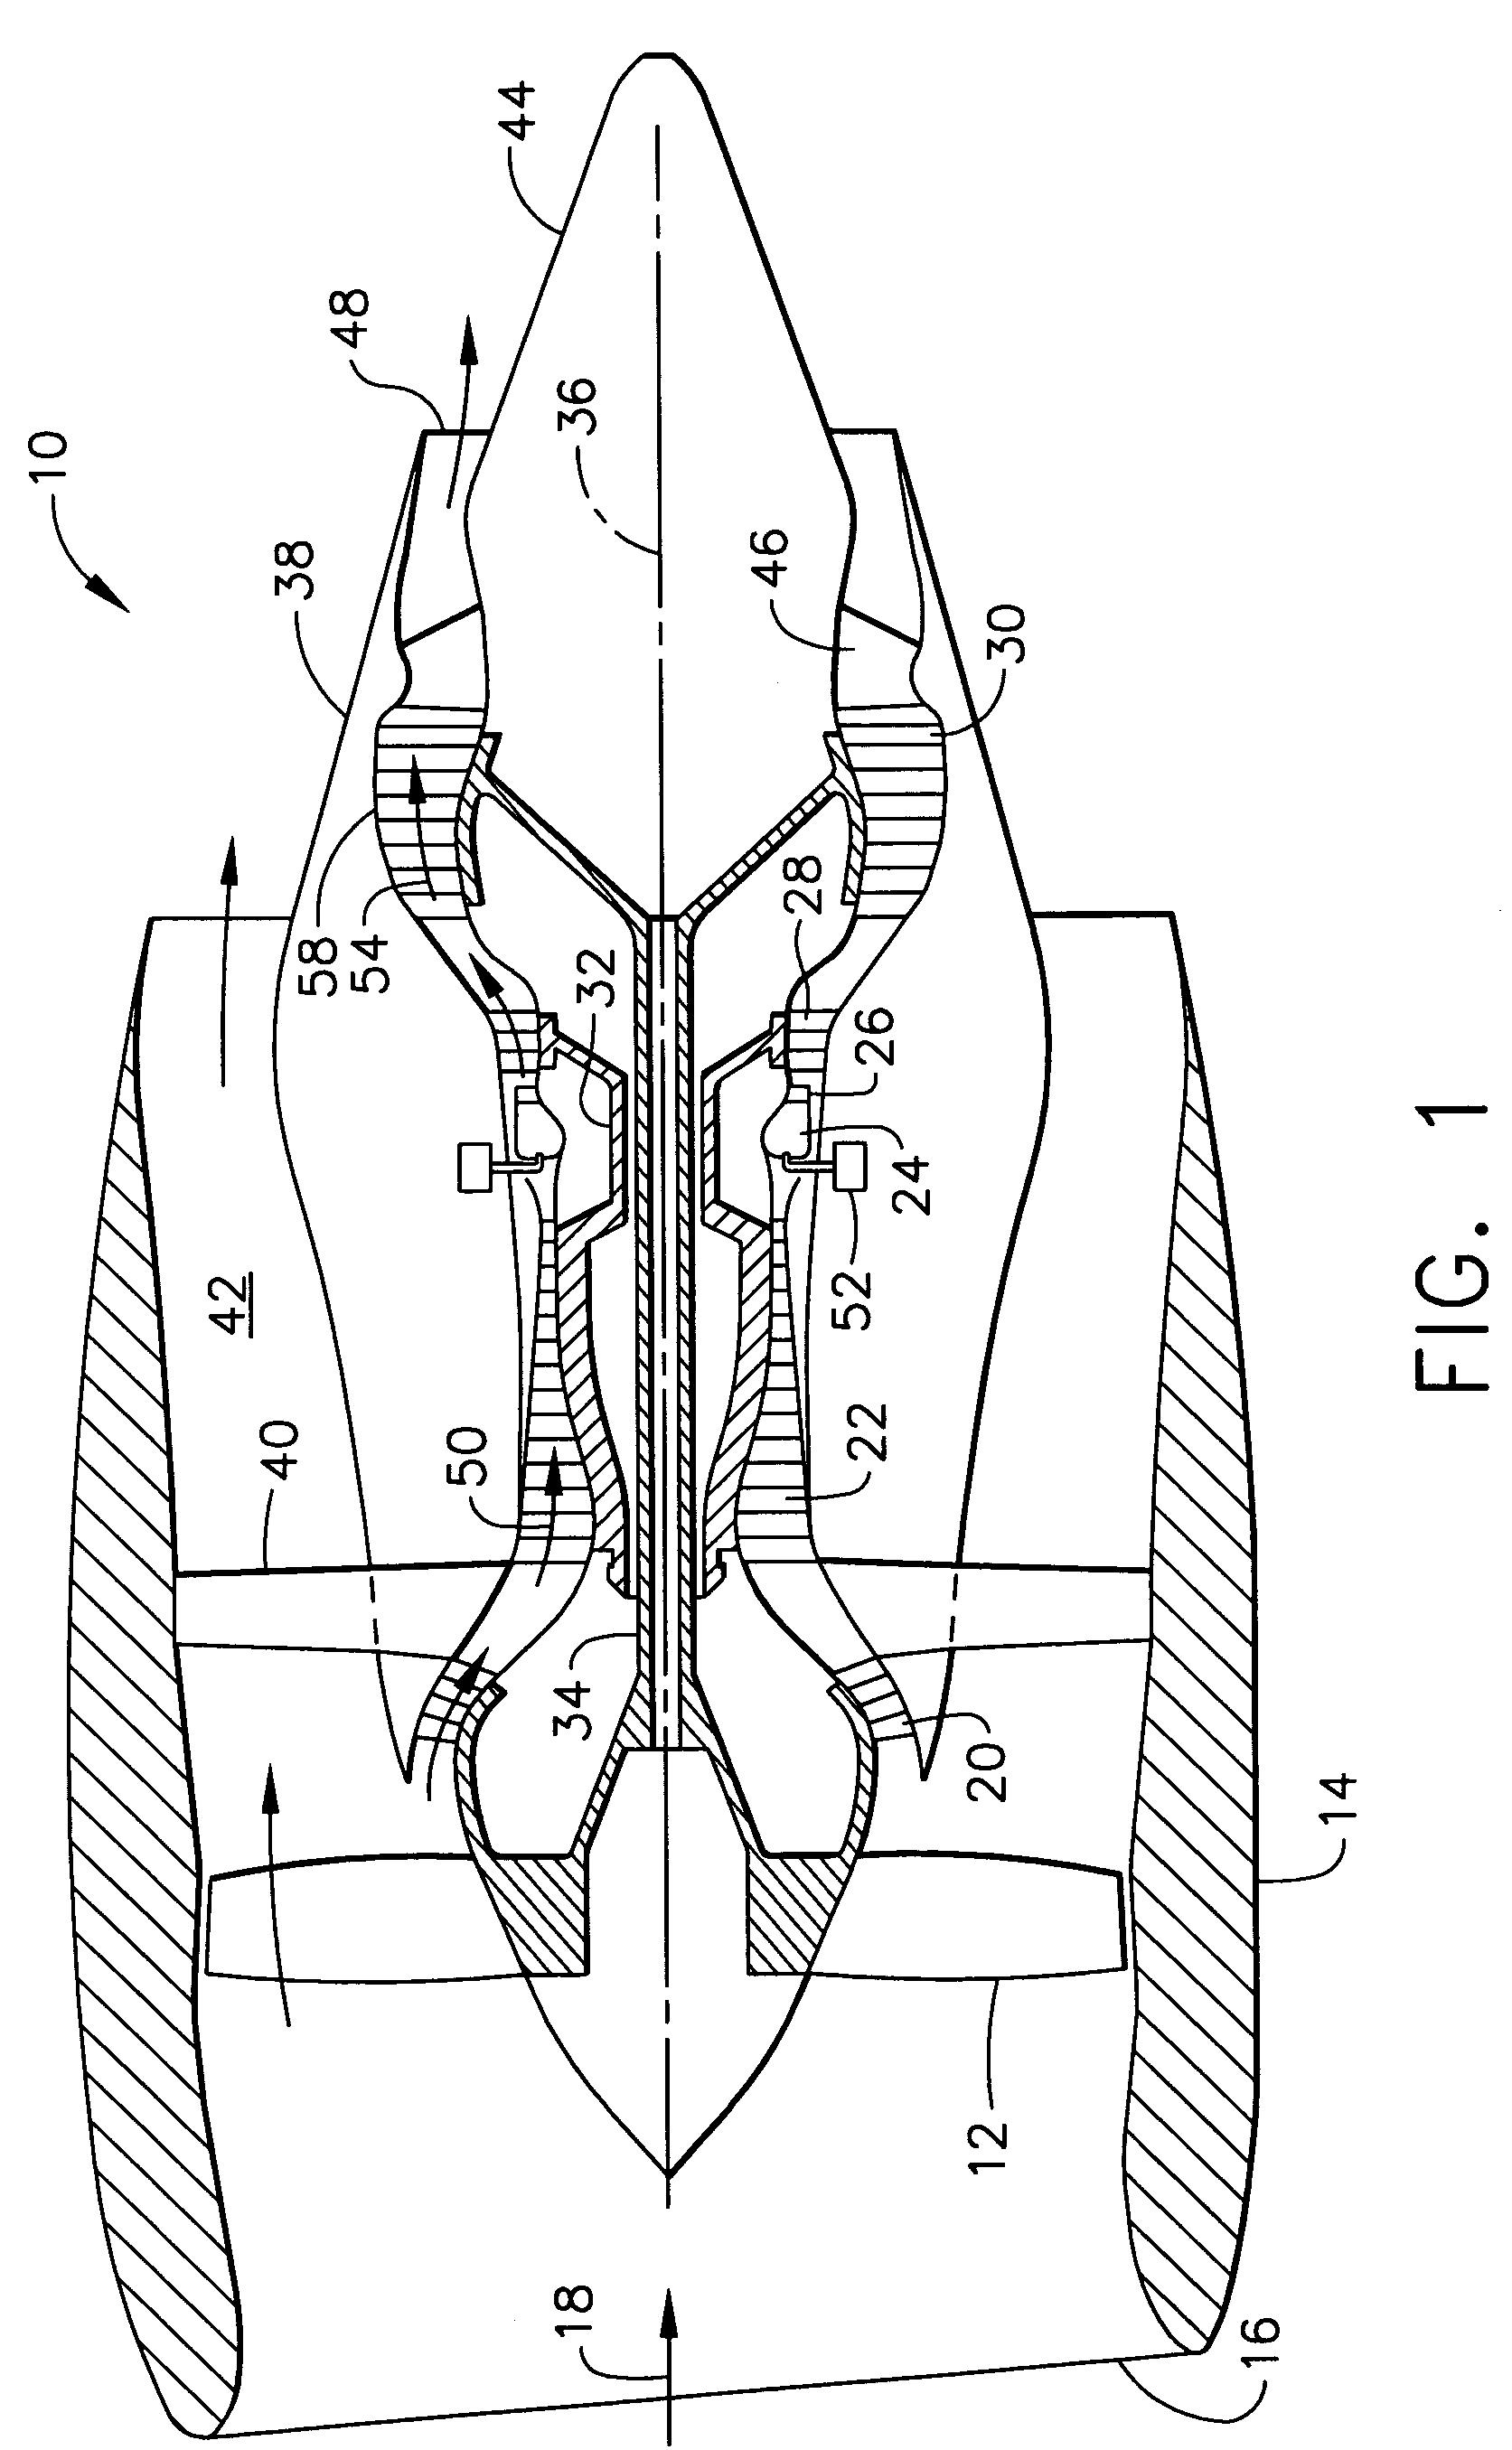 Air-assisted fuel injector for mixer assembly of a gas turbine engine combustor